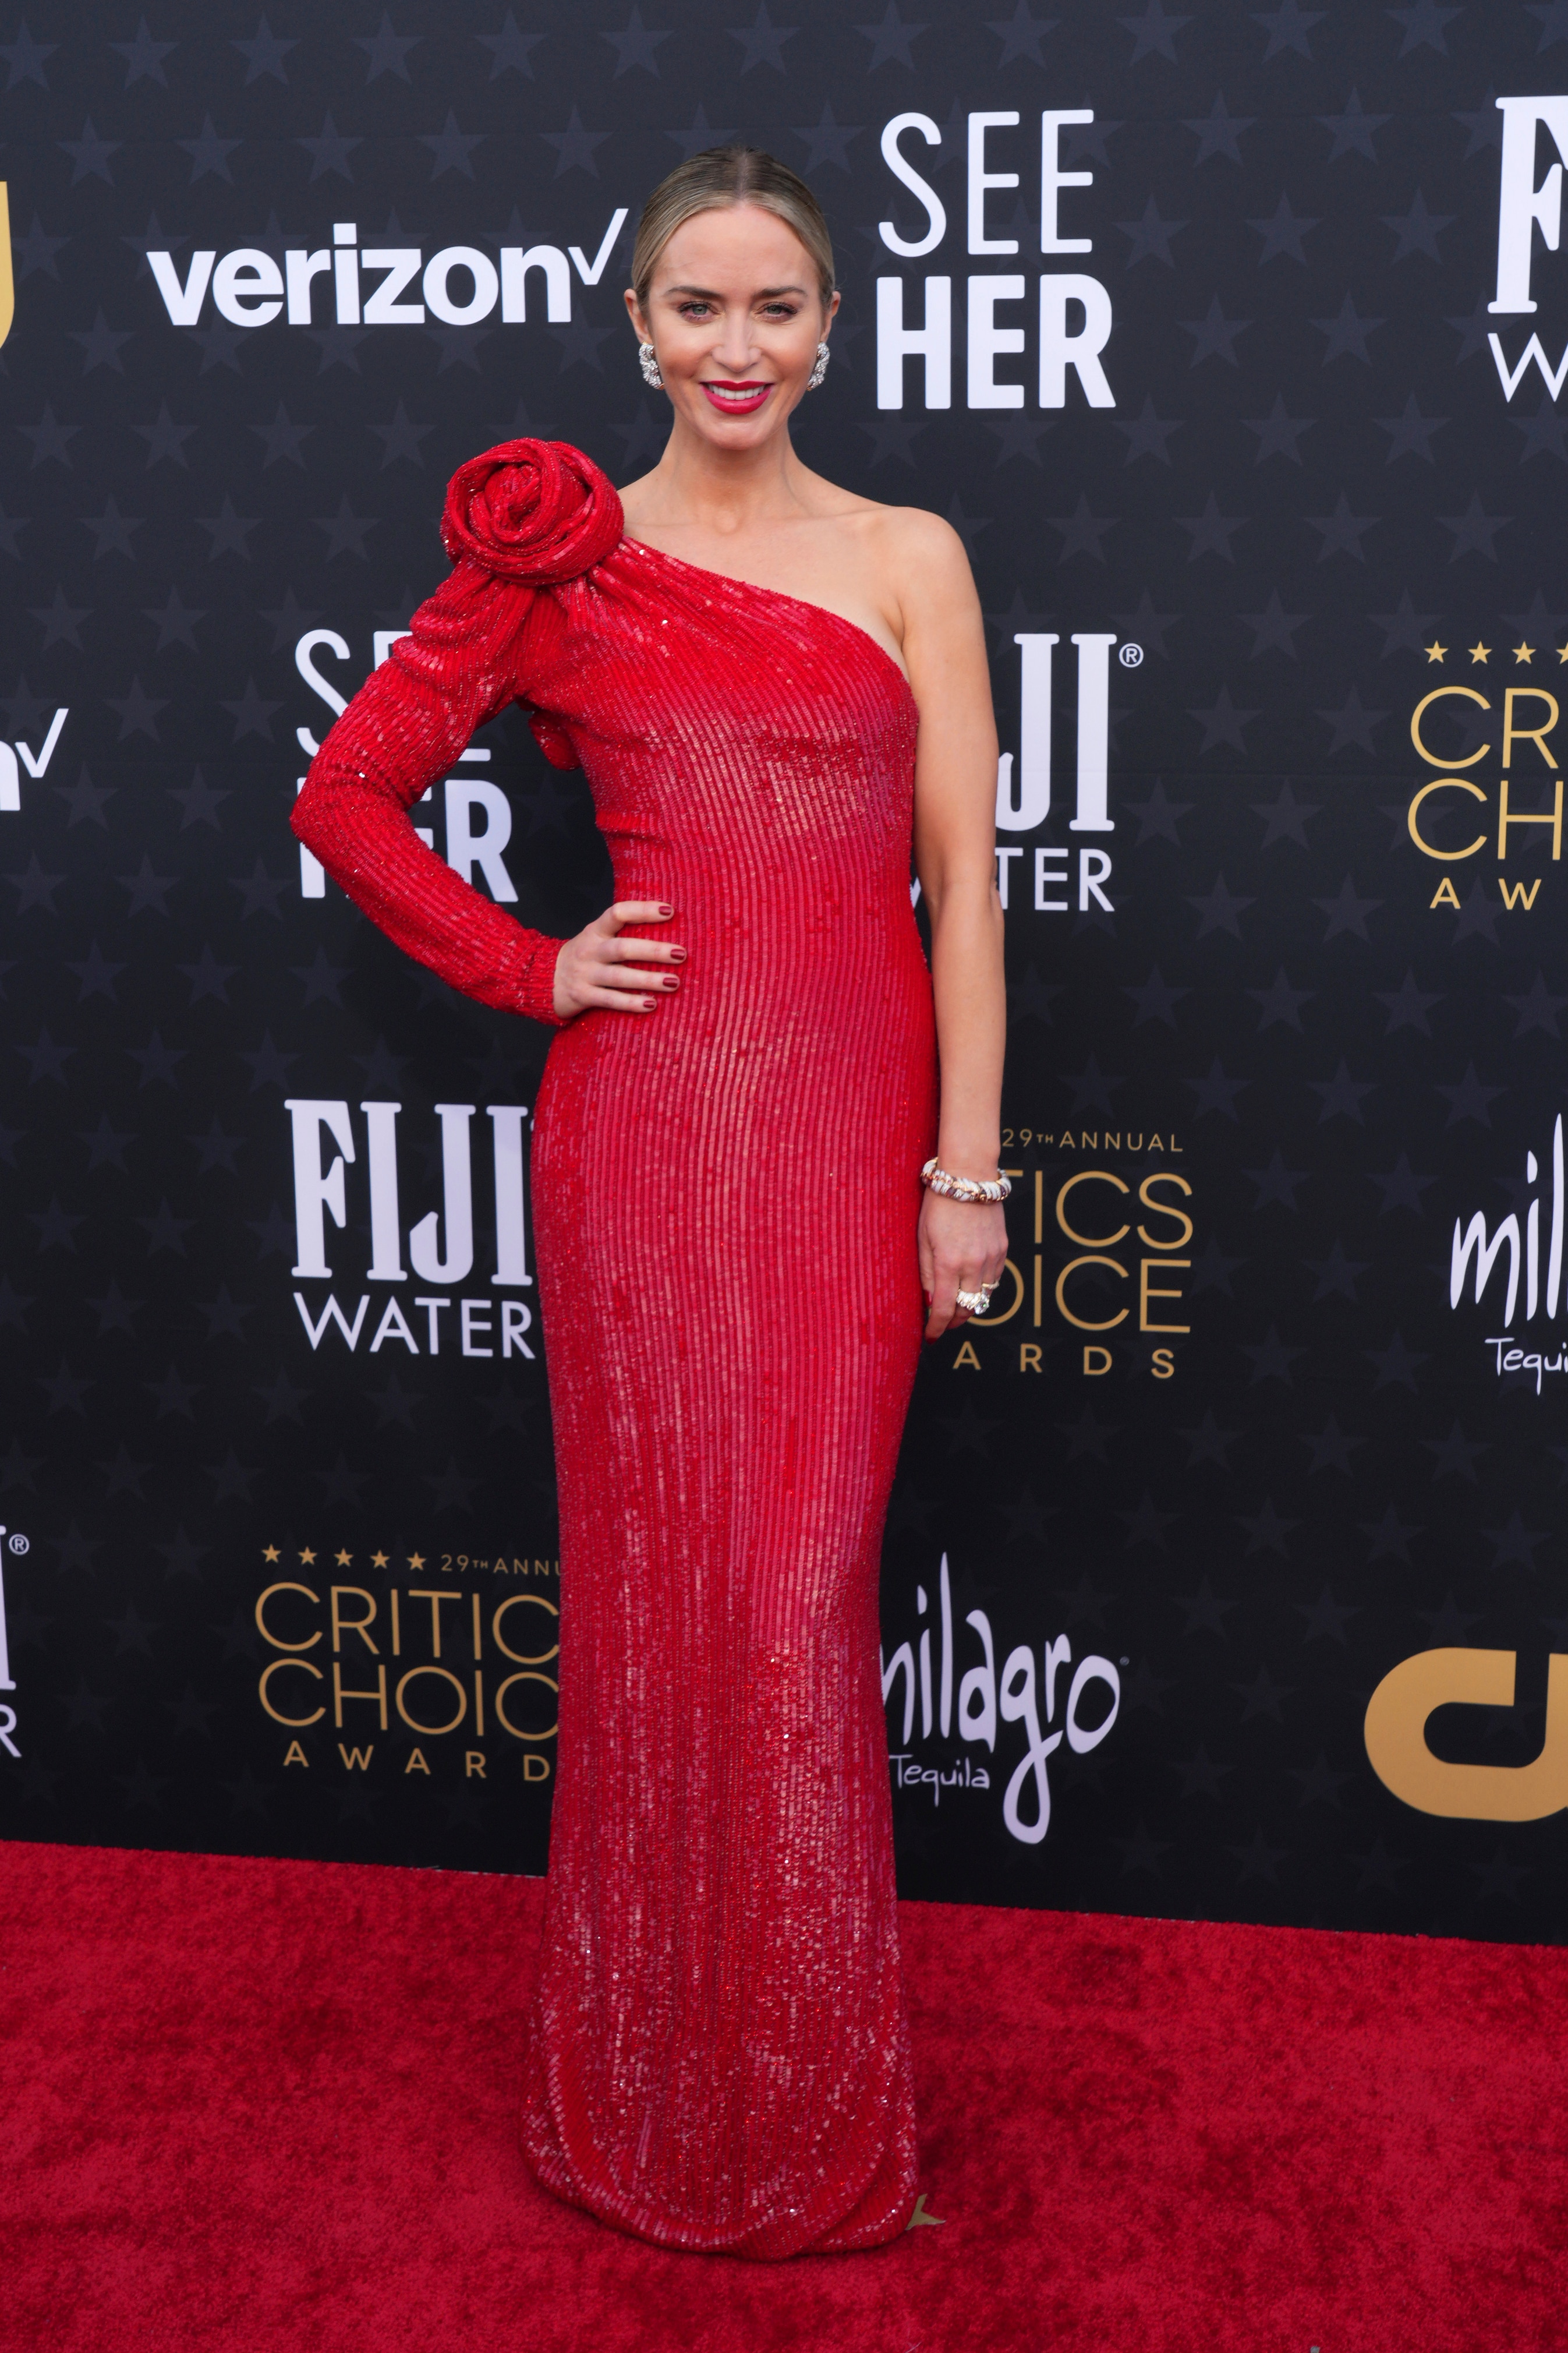 Emily Blunt wearing an off-the-shoulder red gown with a flower on the shoulder with a long sleeve